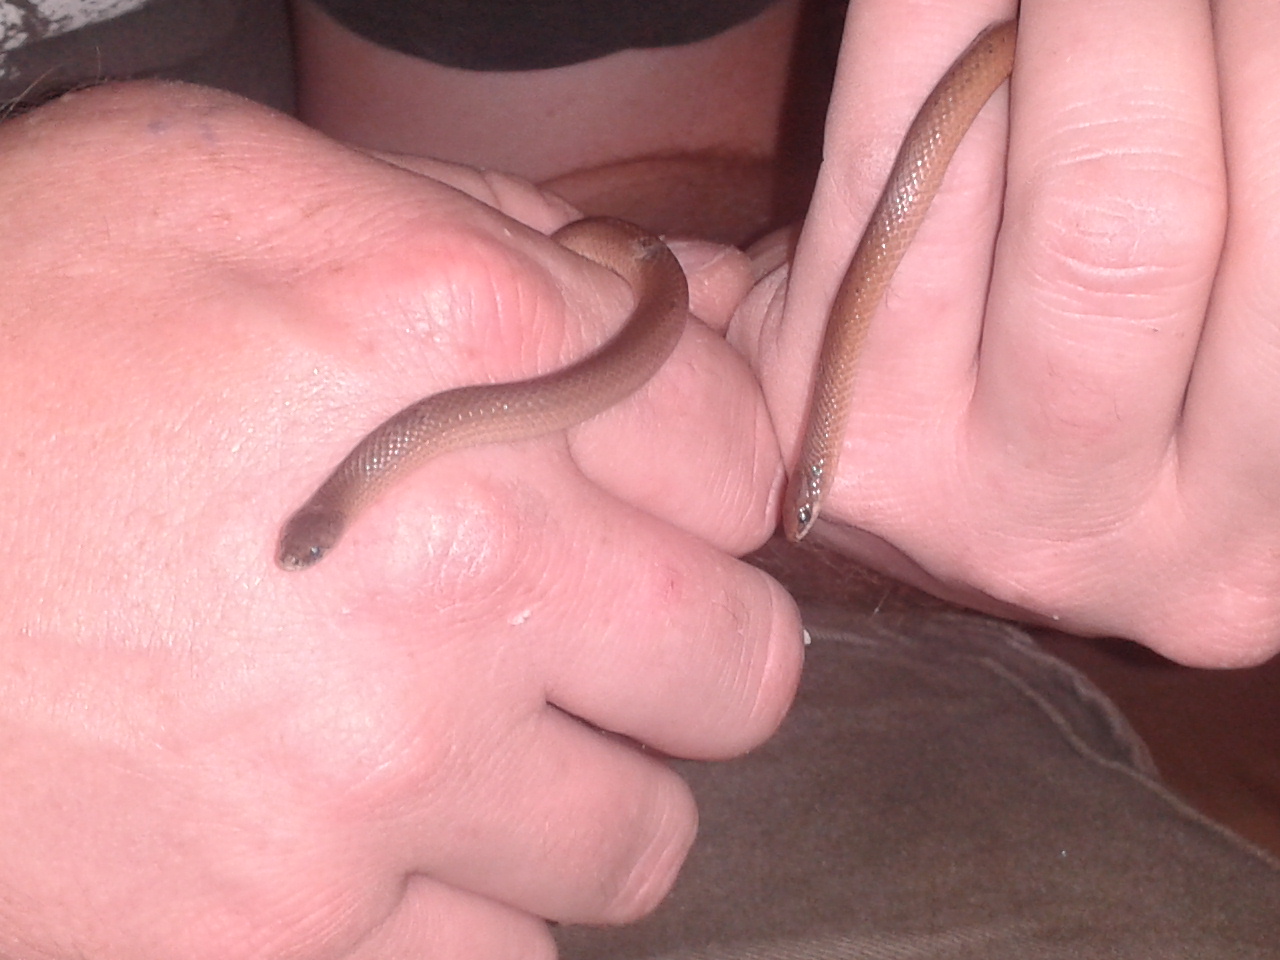 Nag and Nagaina, the two little Rough Earthsnakes that came home with us years ago and started it all...